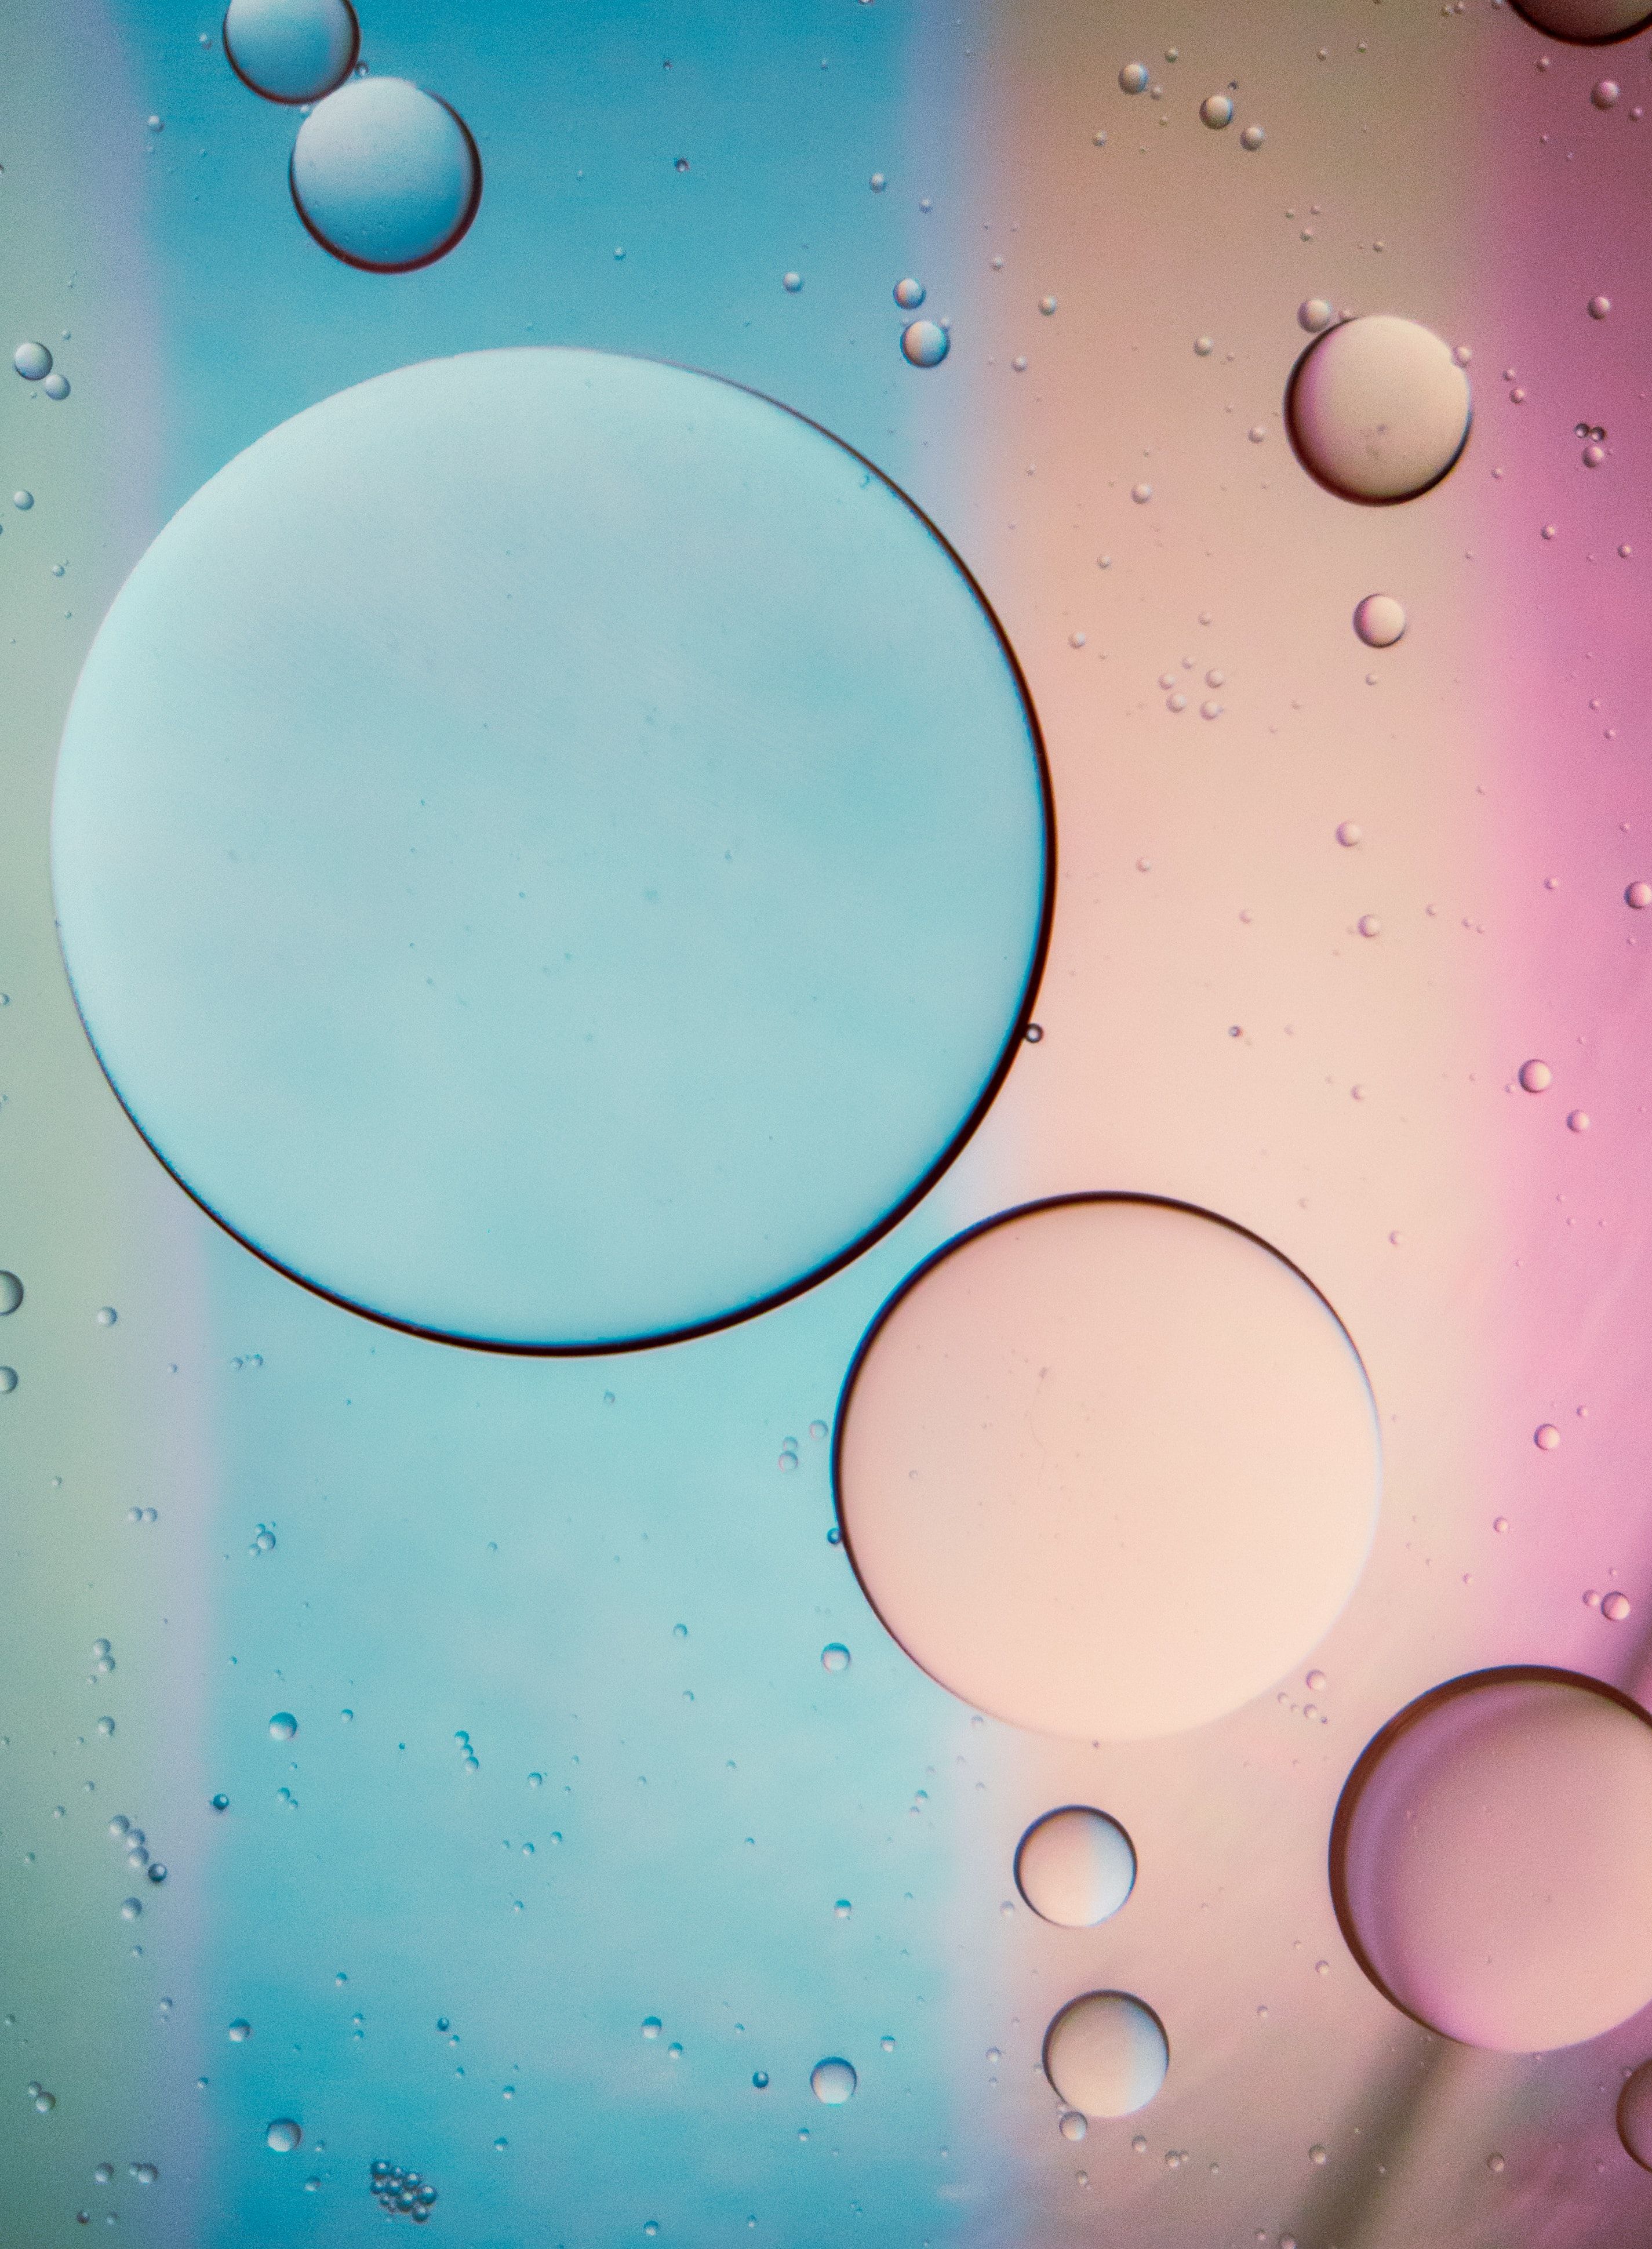 Oil bubbles on a water surface with a colored background - Bubbles